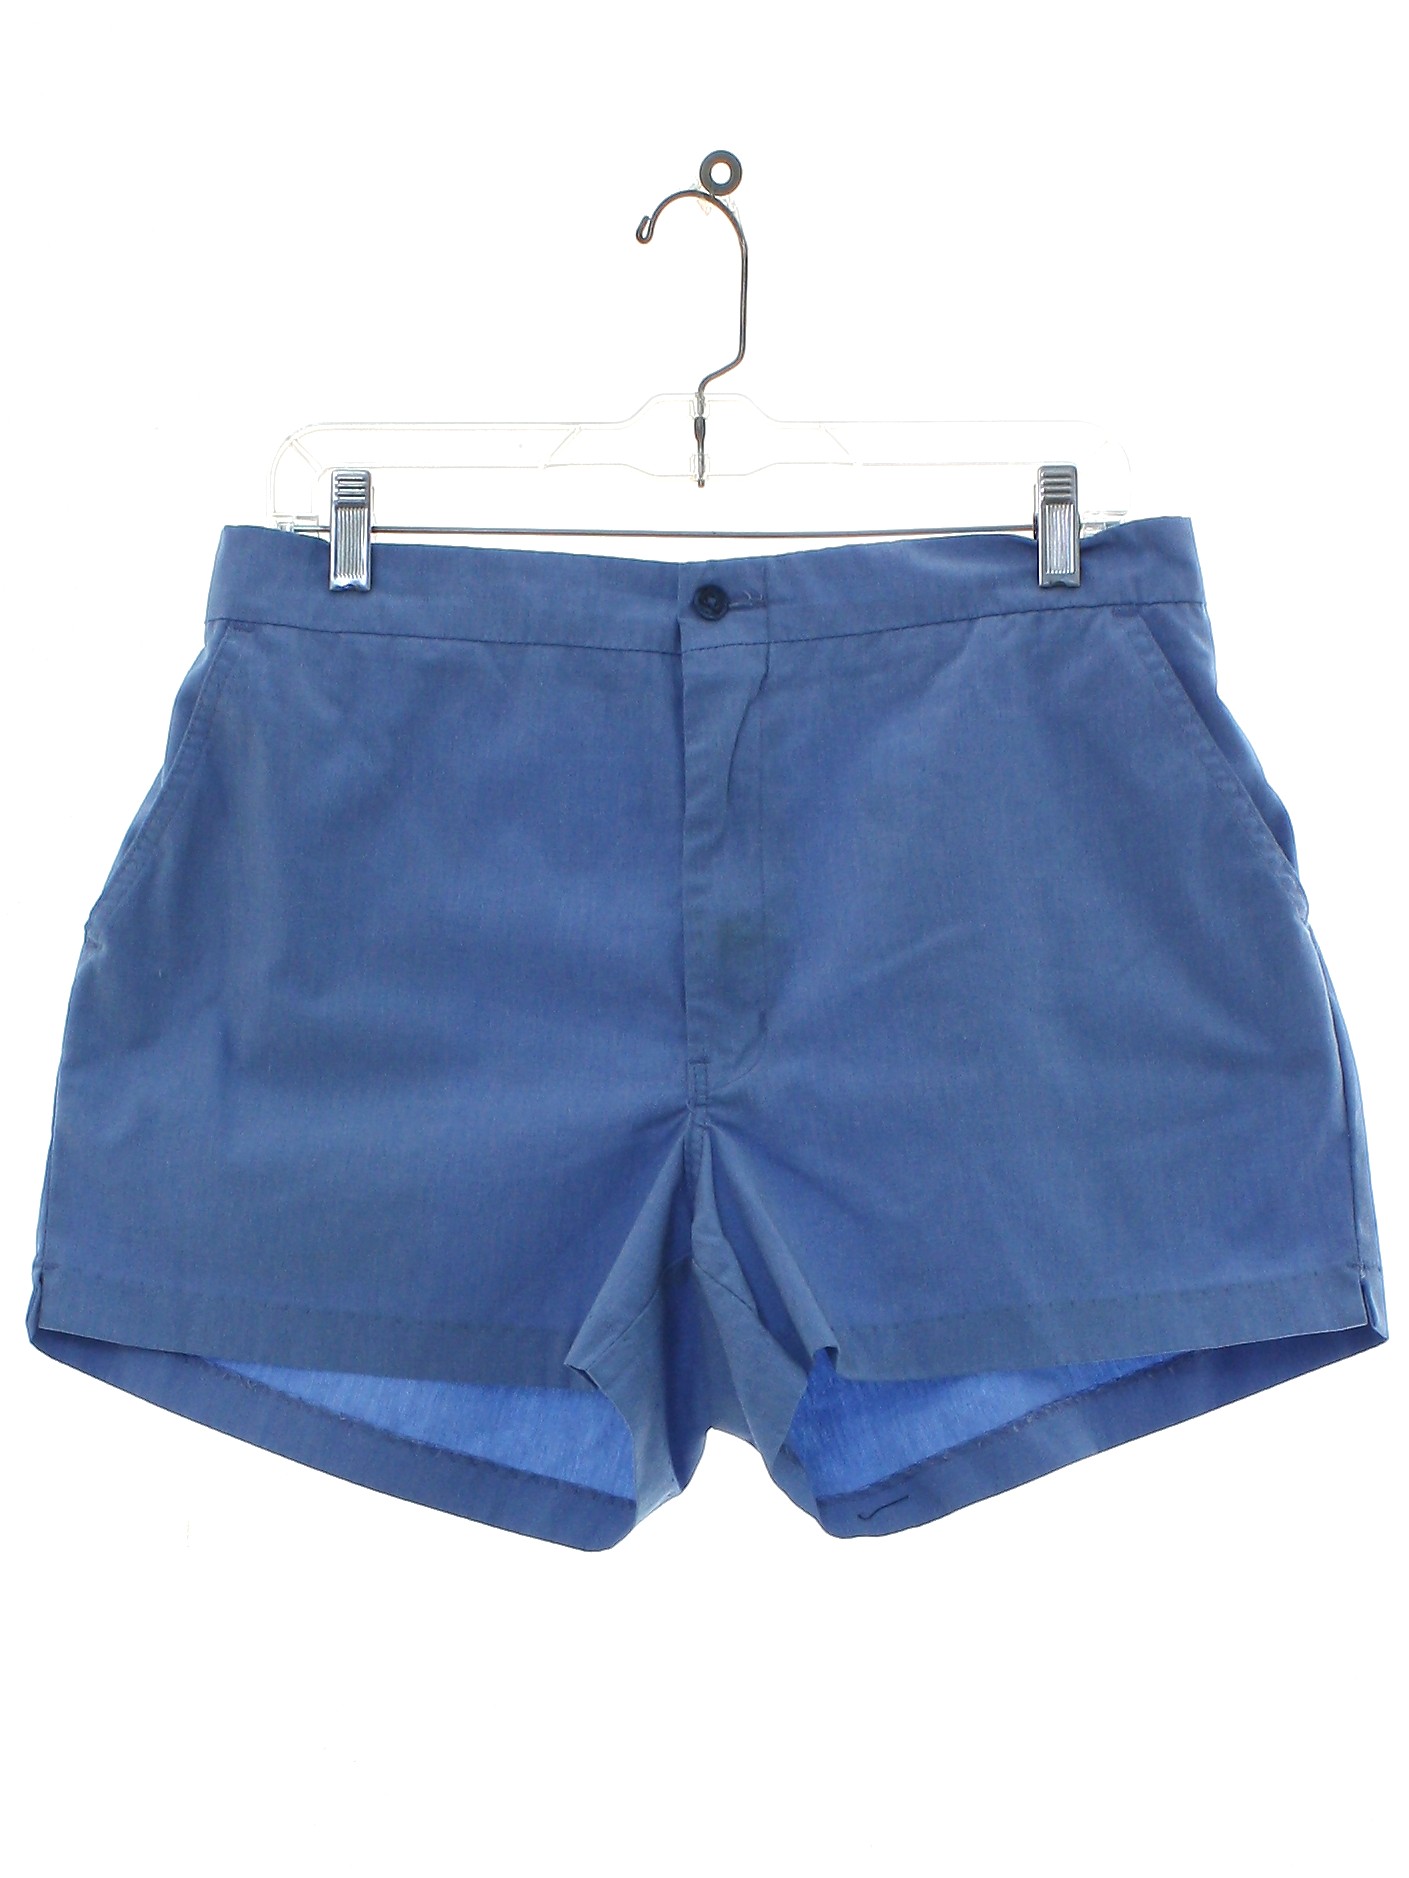 Eighties Vintage Shorts: 80s -Care Label- Mens hazy sky blue polyester ...